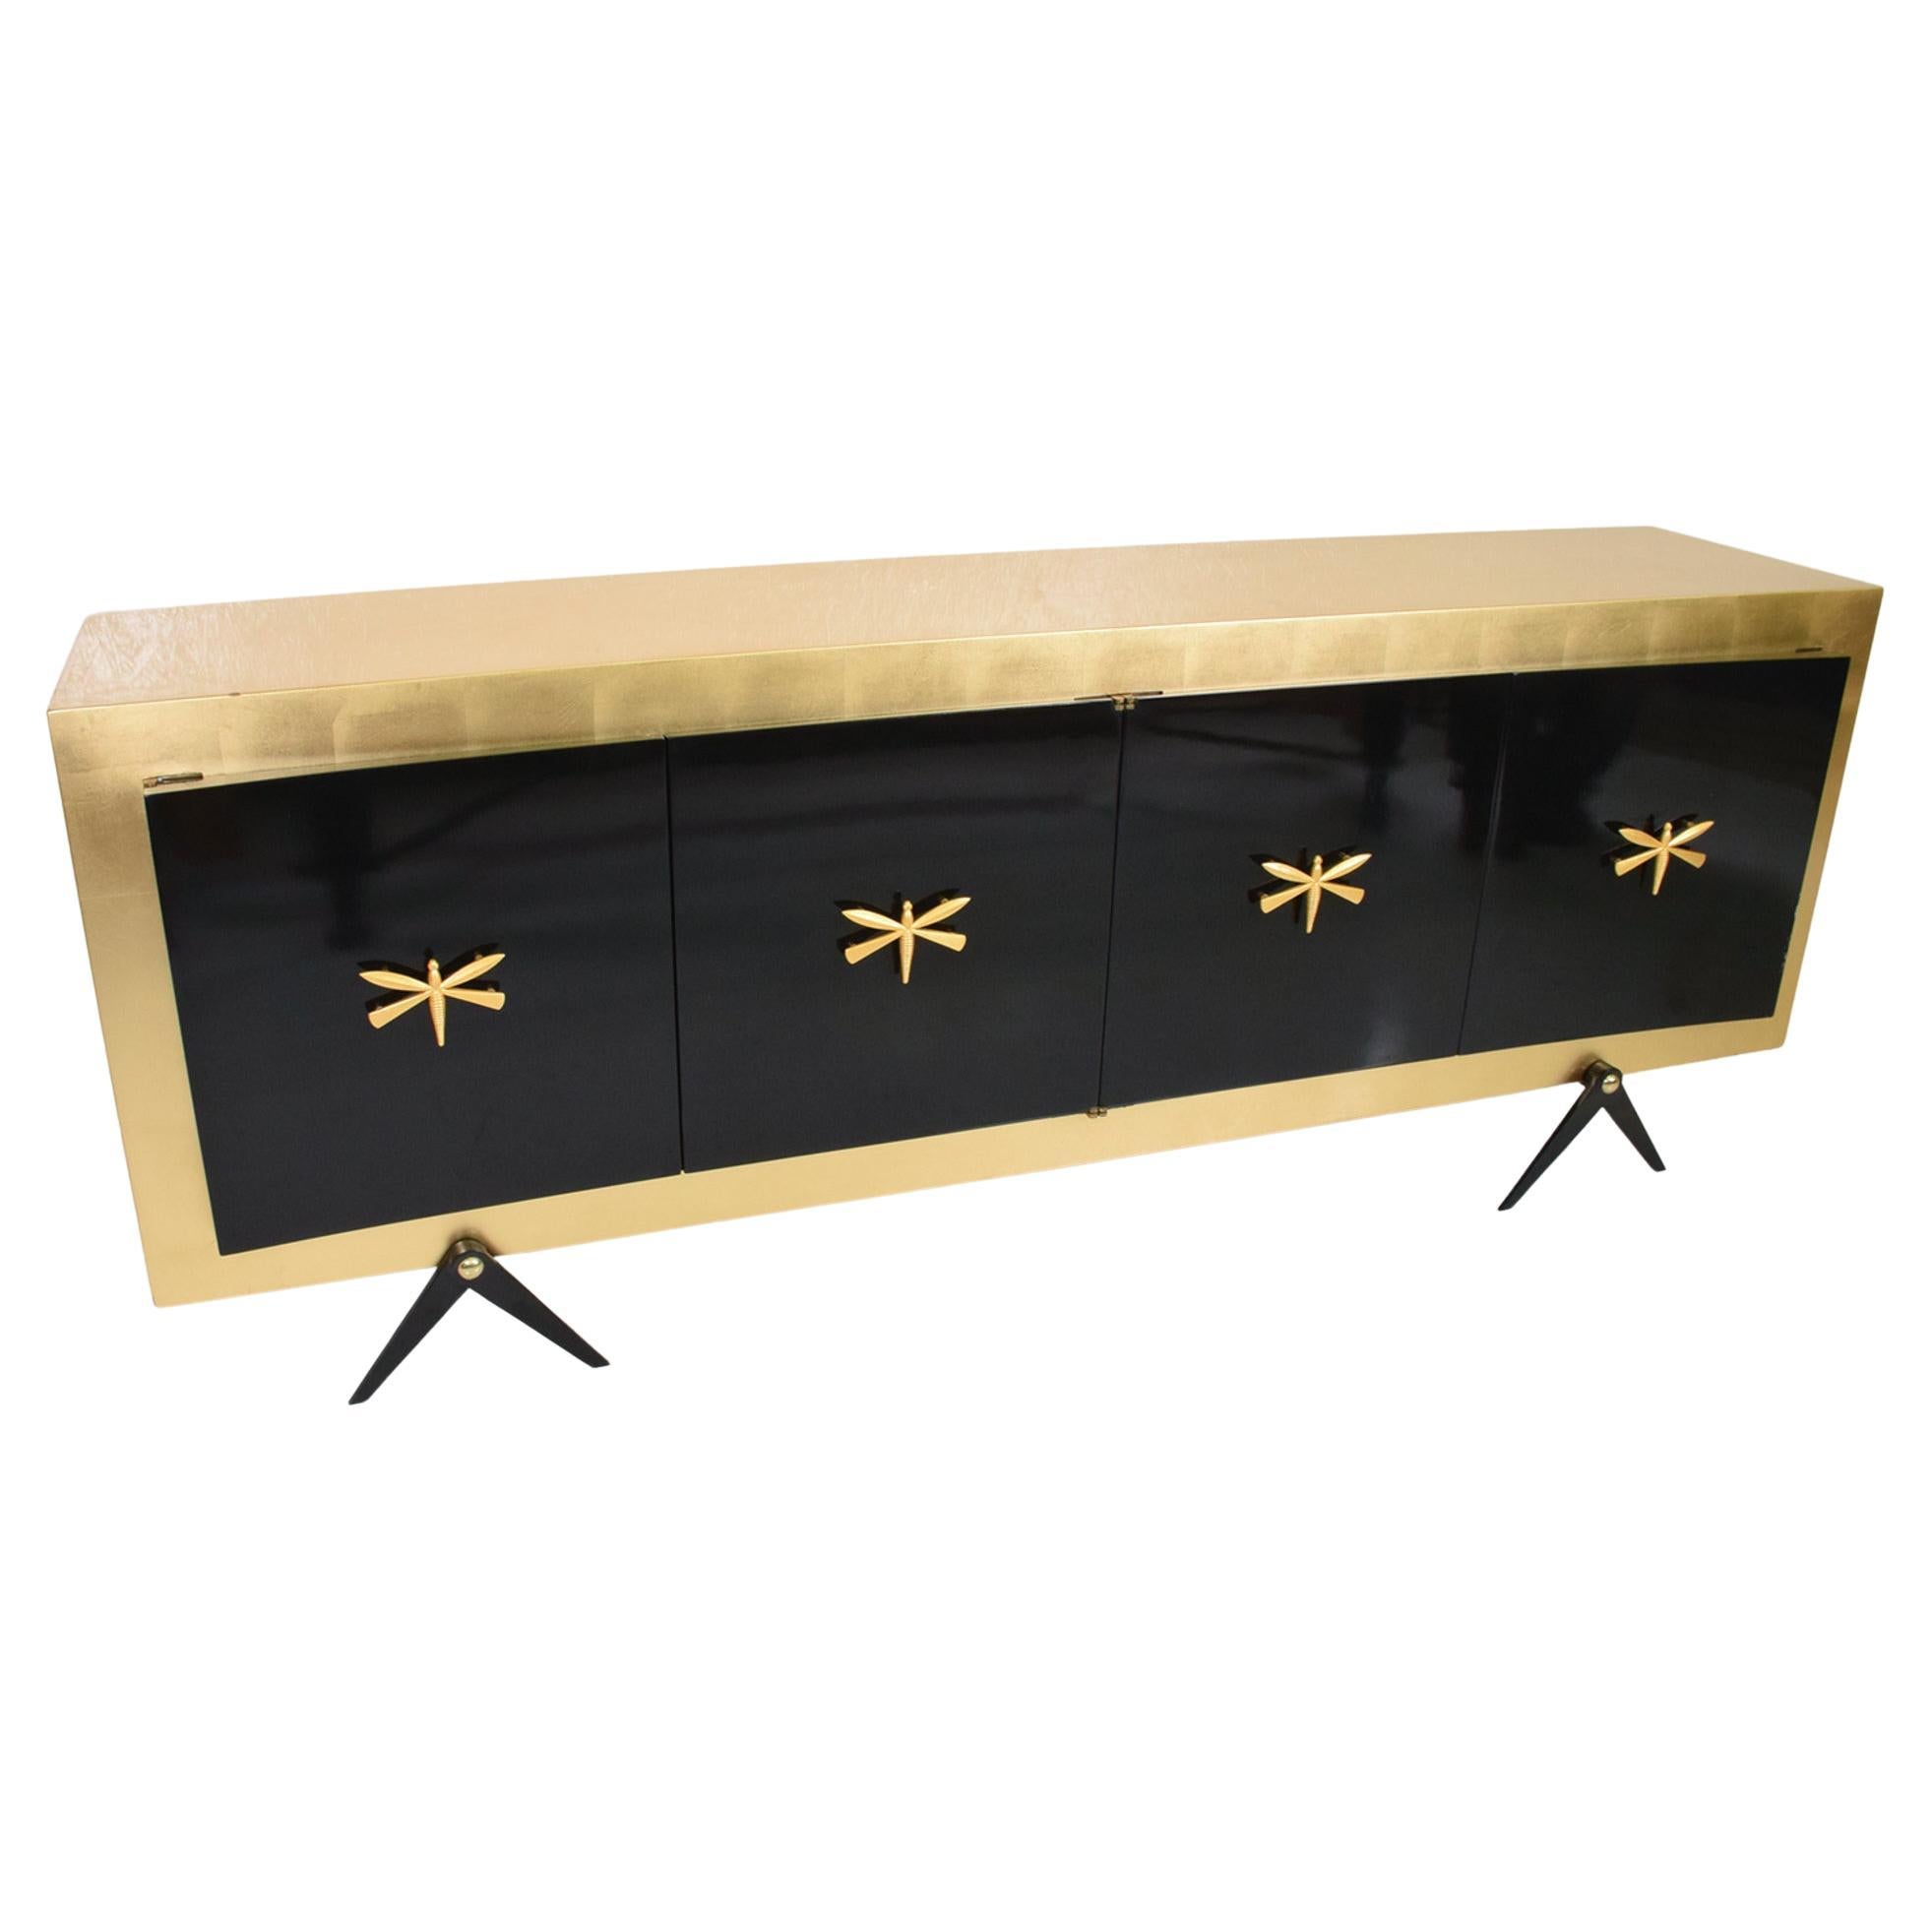 1950s Arturo Pani Black Lacquer and Gold Leaf Dragonfly Credenza